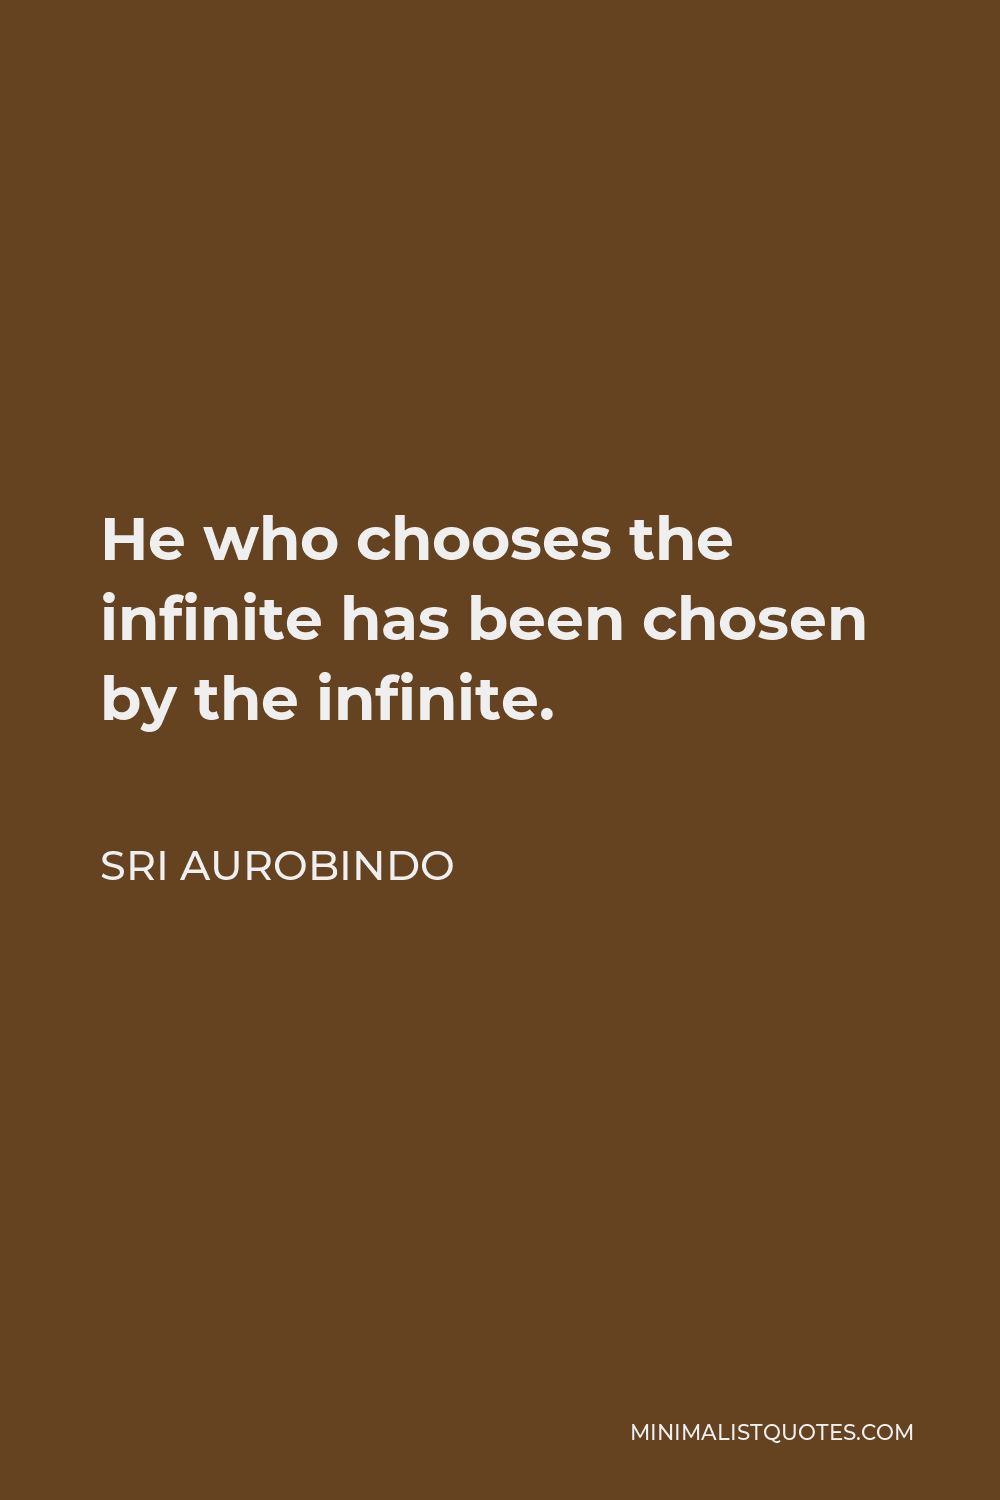 Sri Aurobindo Quote - He who chooses the infinite has been chosen by the infinite.